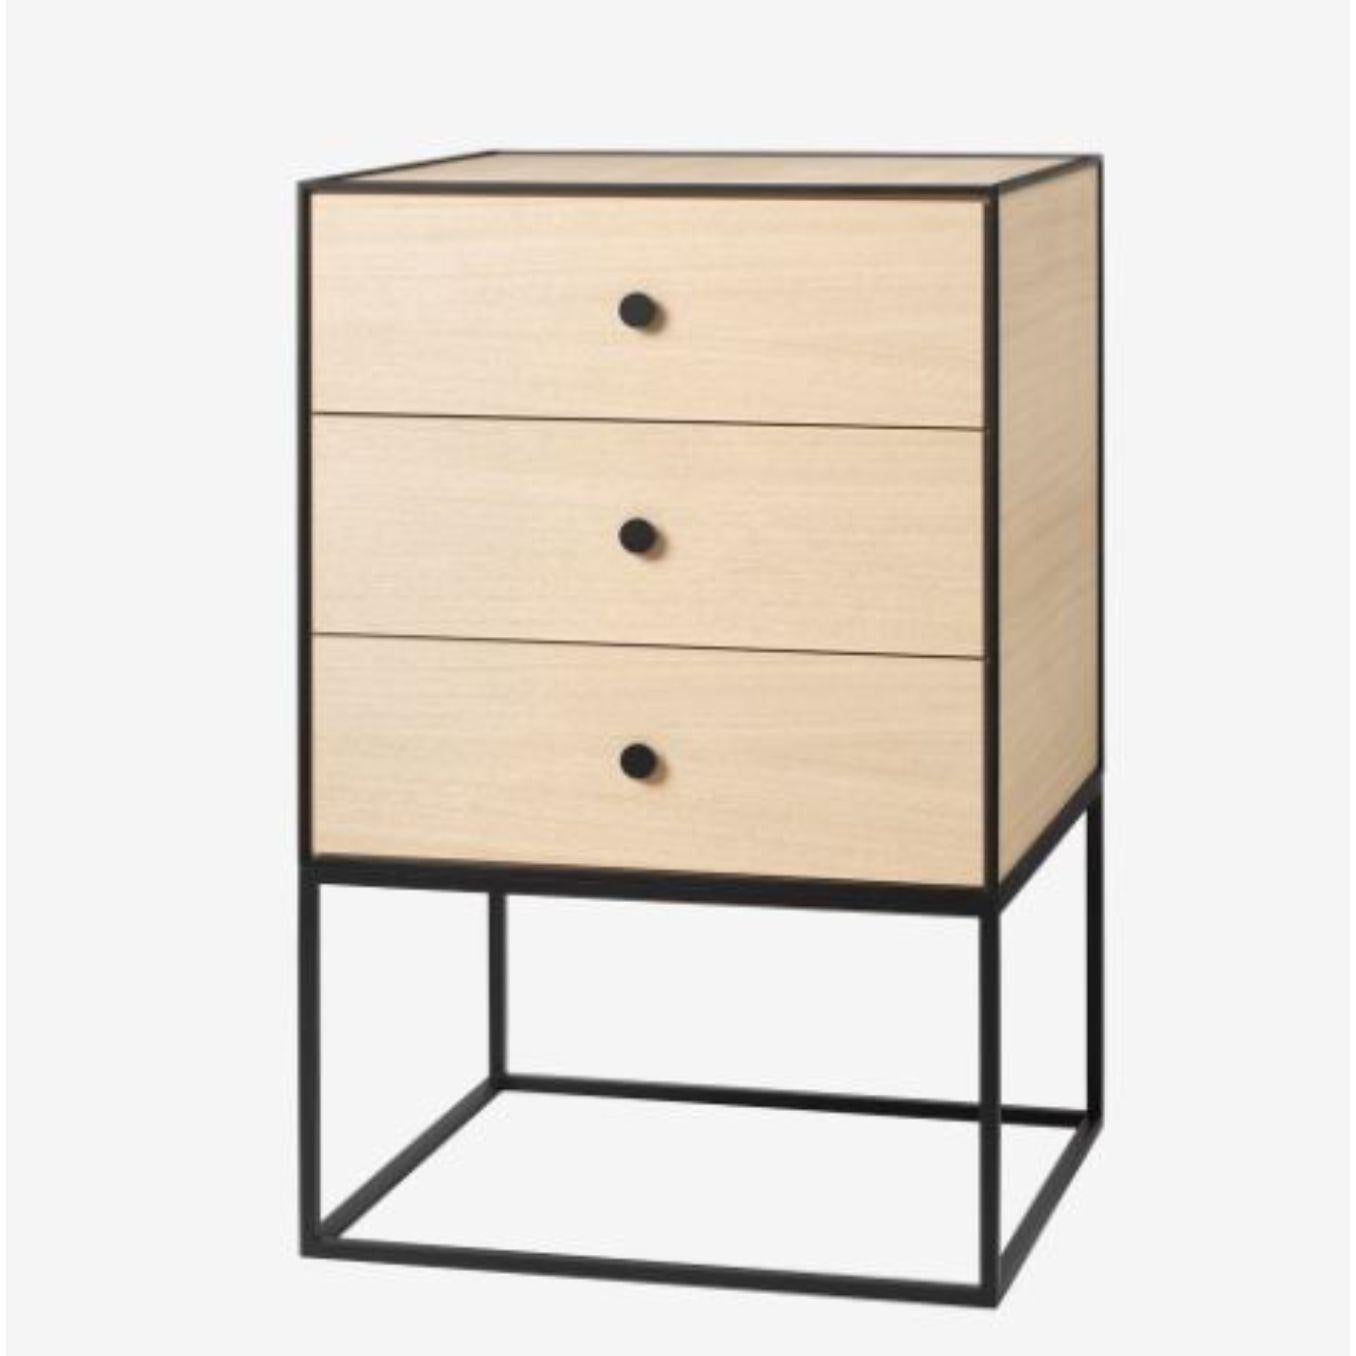 Danish 49 Black Ash Frame Sideboard with 3 Drawers by Lassen For Sale